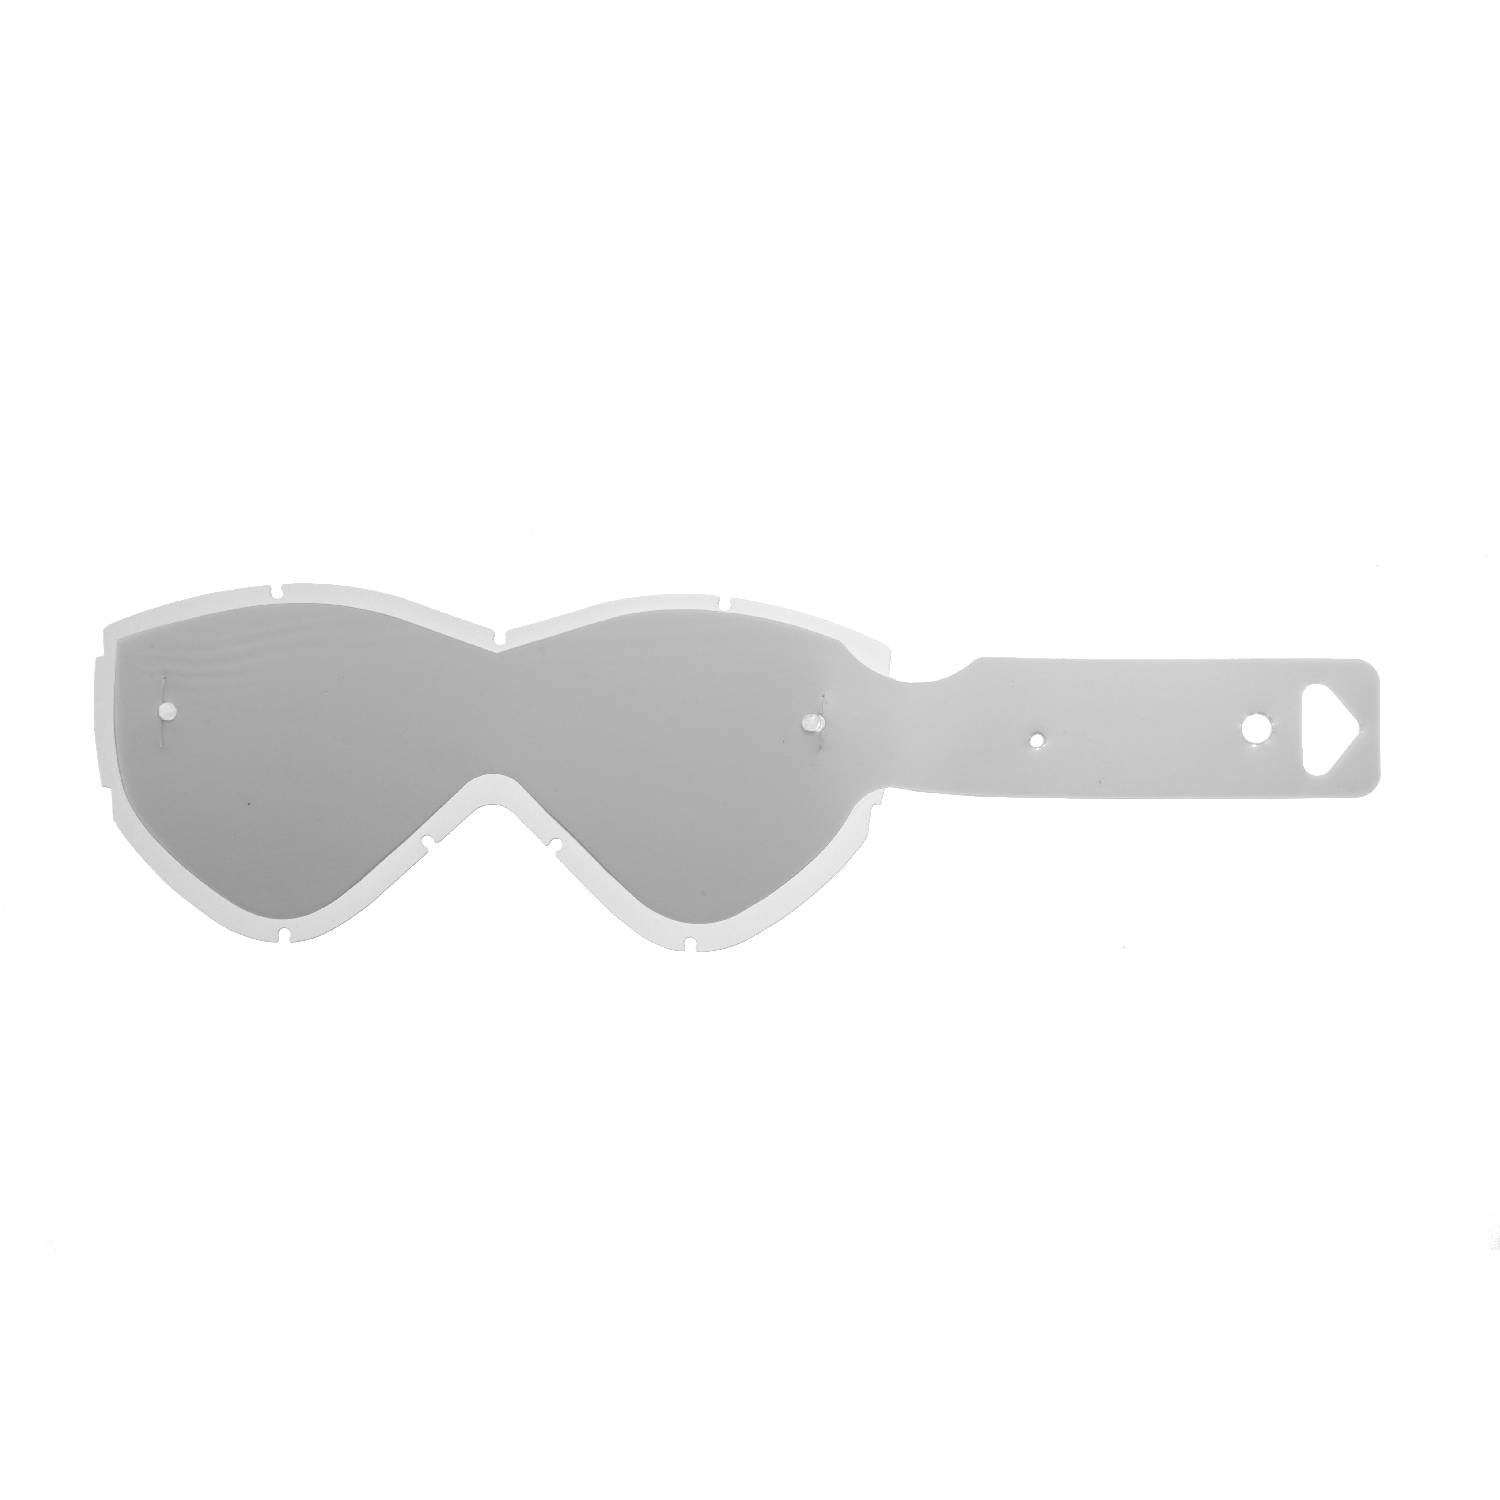 combo lenses with clear lenses with 10 tear off compatible for Smith Warp goggle